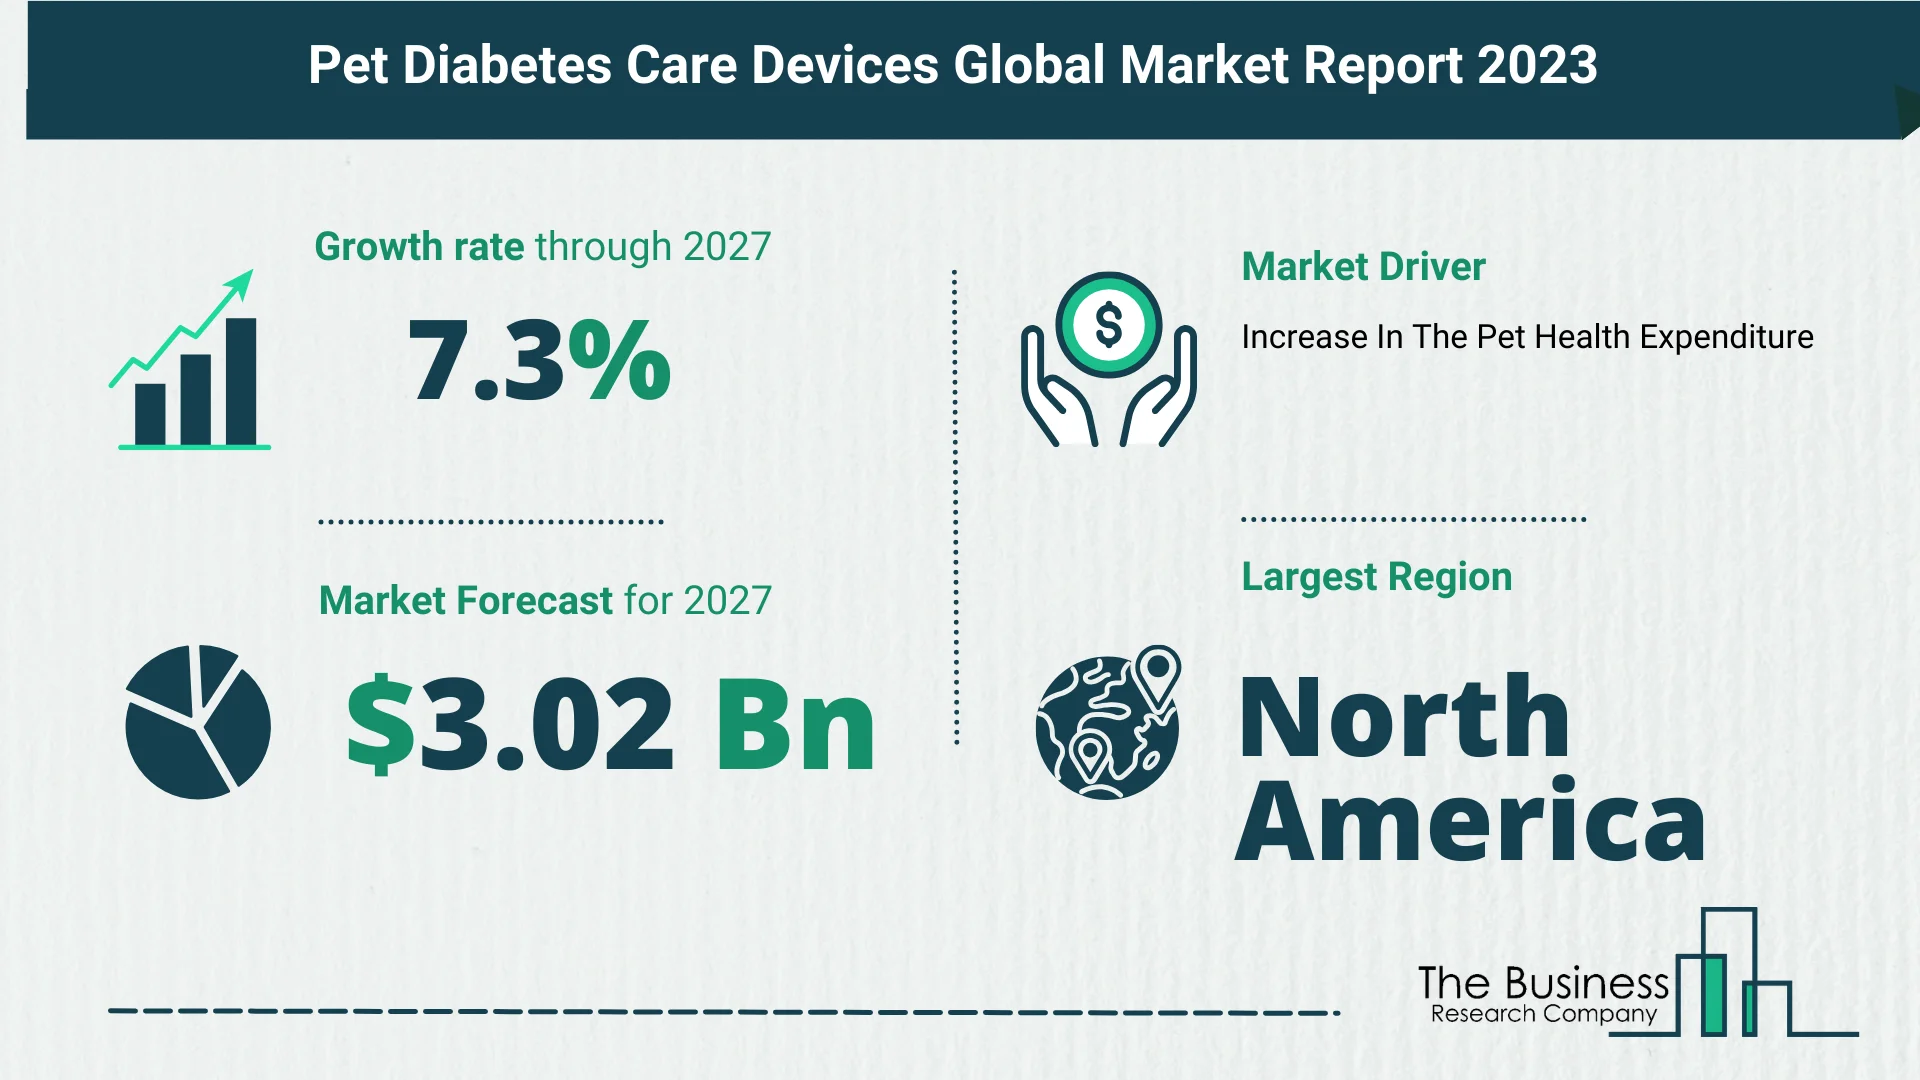 Global Pet Diabetes Care Devices Market Overview 2023: Size, Drivers, And Trends